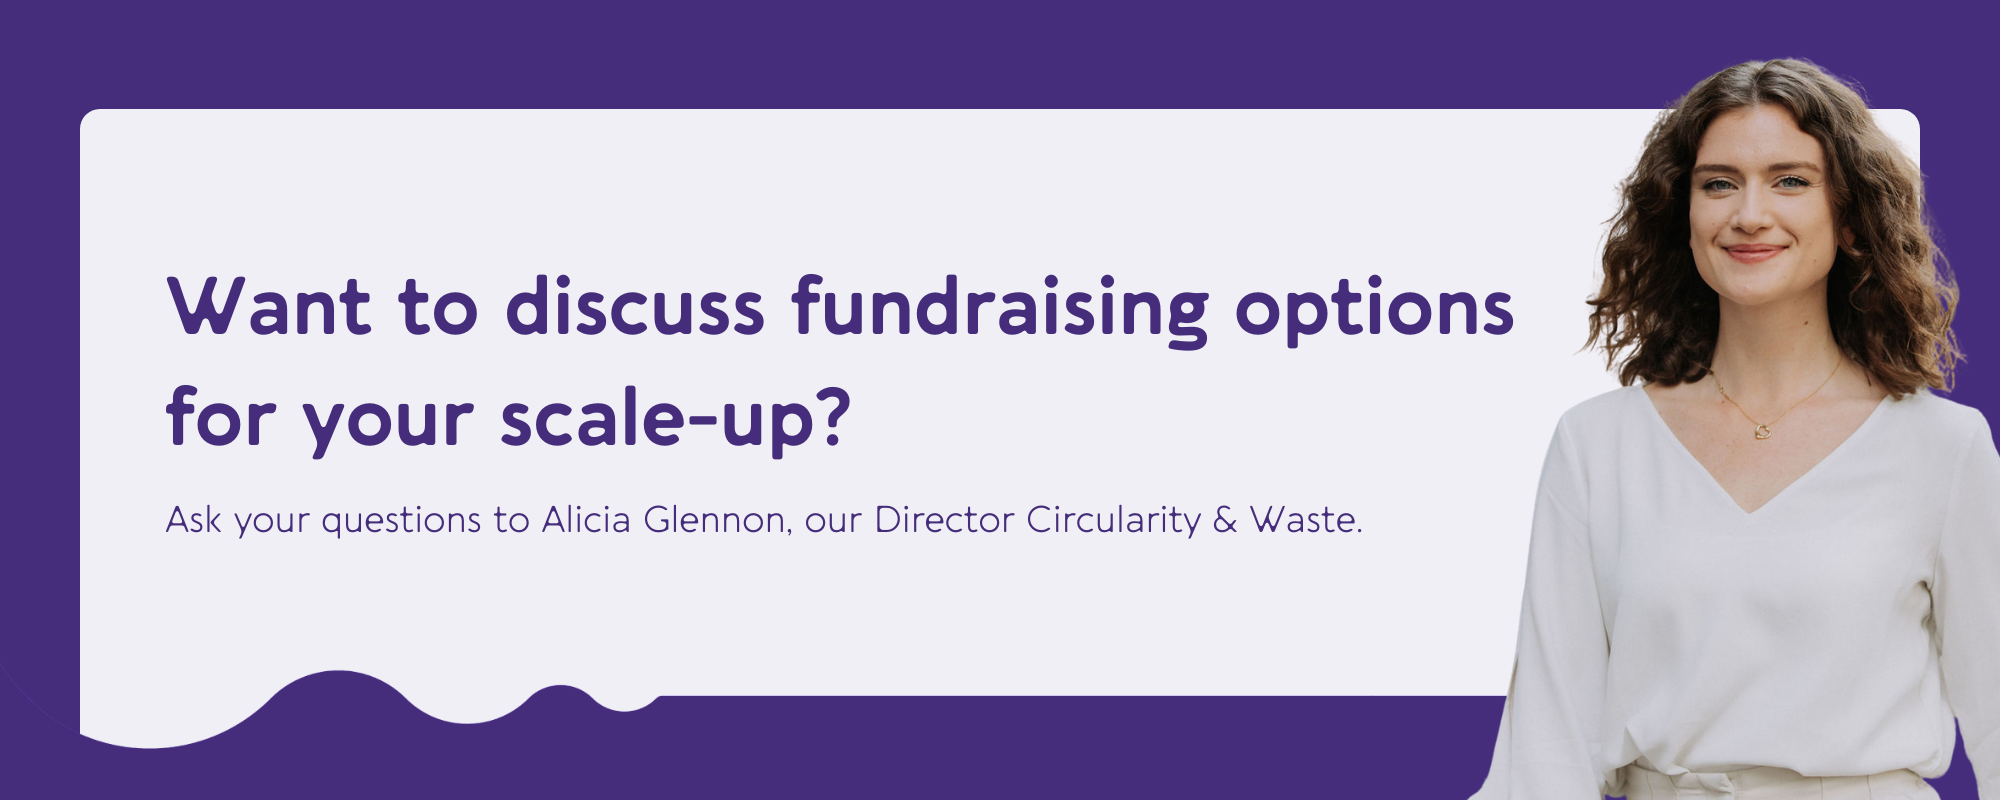 Want to discuss fundraising options for your scale-up?